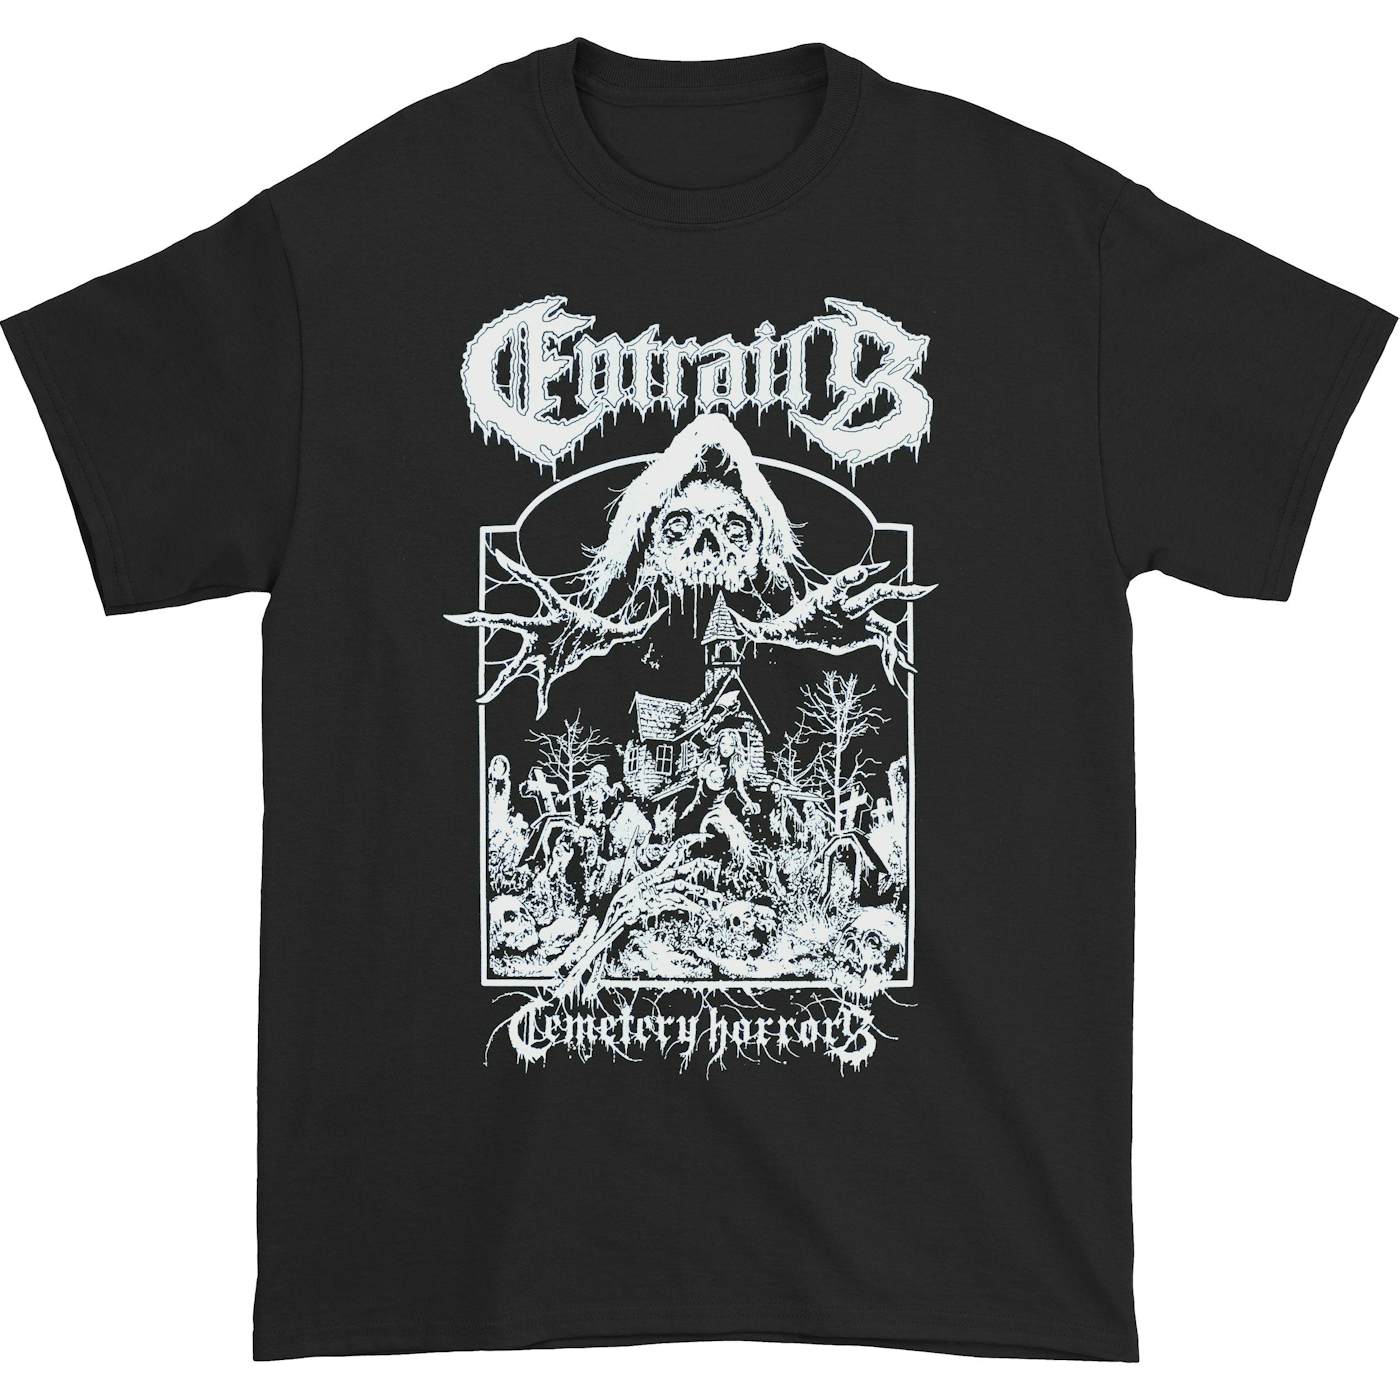 Entrails "Cemetary Horrors" T-Shirt